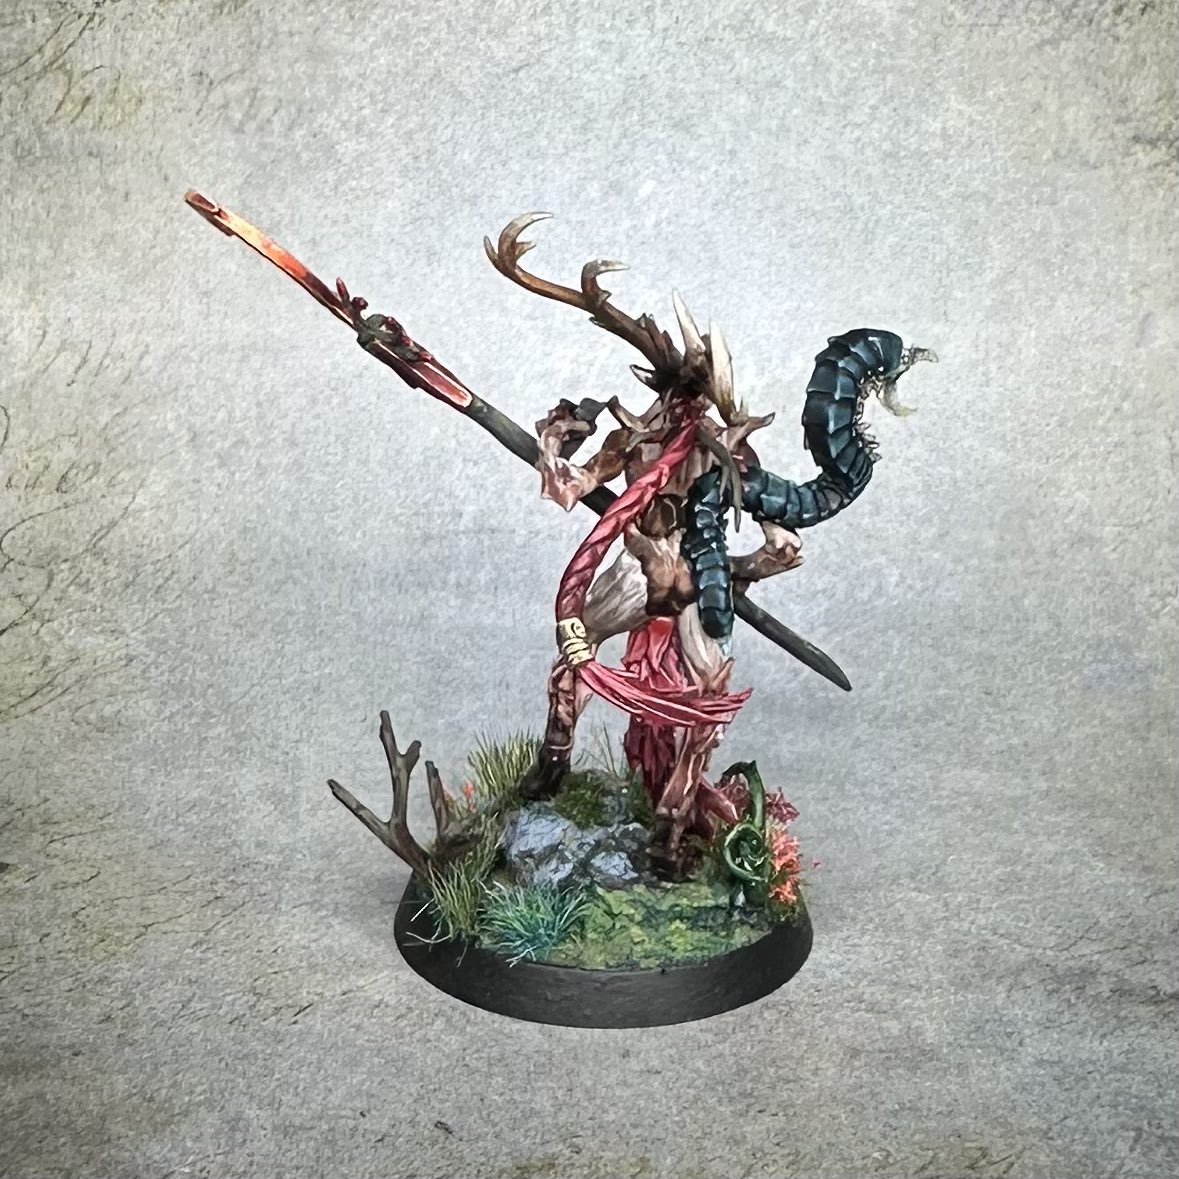 I'm finally happy with the scheme and balance of colours
Time for 'mass' production 
#warmongers #wepaintminis #redgrassgames #ageofsigmar #warhammercommunity #sylvaneth